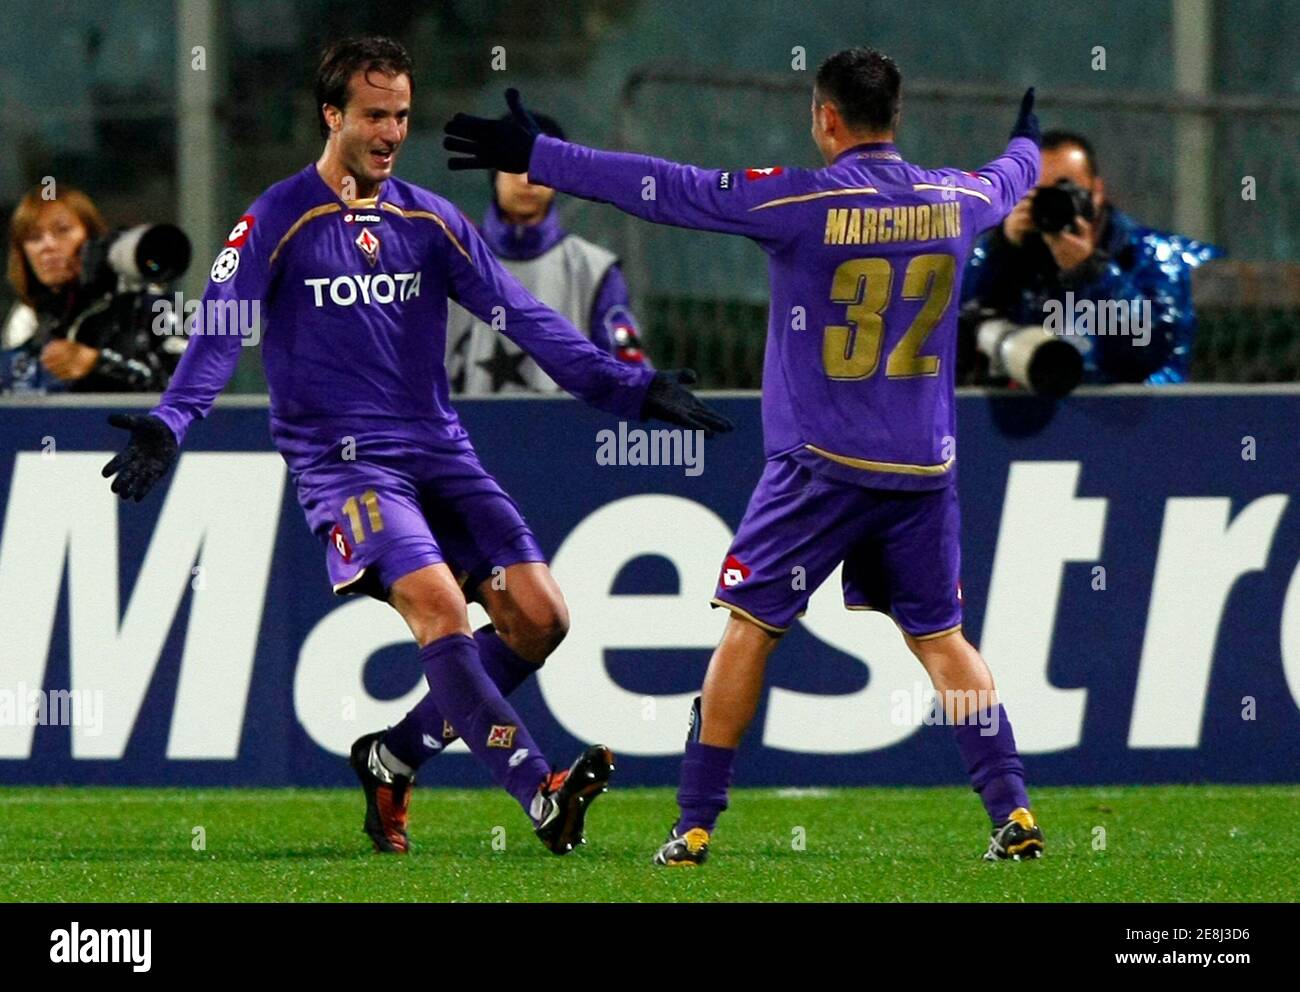 Fiorentina Alberto Gilardino (L) celebrates after scoring with his teammate Marco Marchionni during their Champions League soccer match against Debrecen at the Artemio Franchi stadium in Florence November 4, 2009. REUTERS/Alessandro Bianchi   (ITALY SPORT SOCCER) Stock Photo